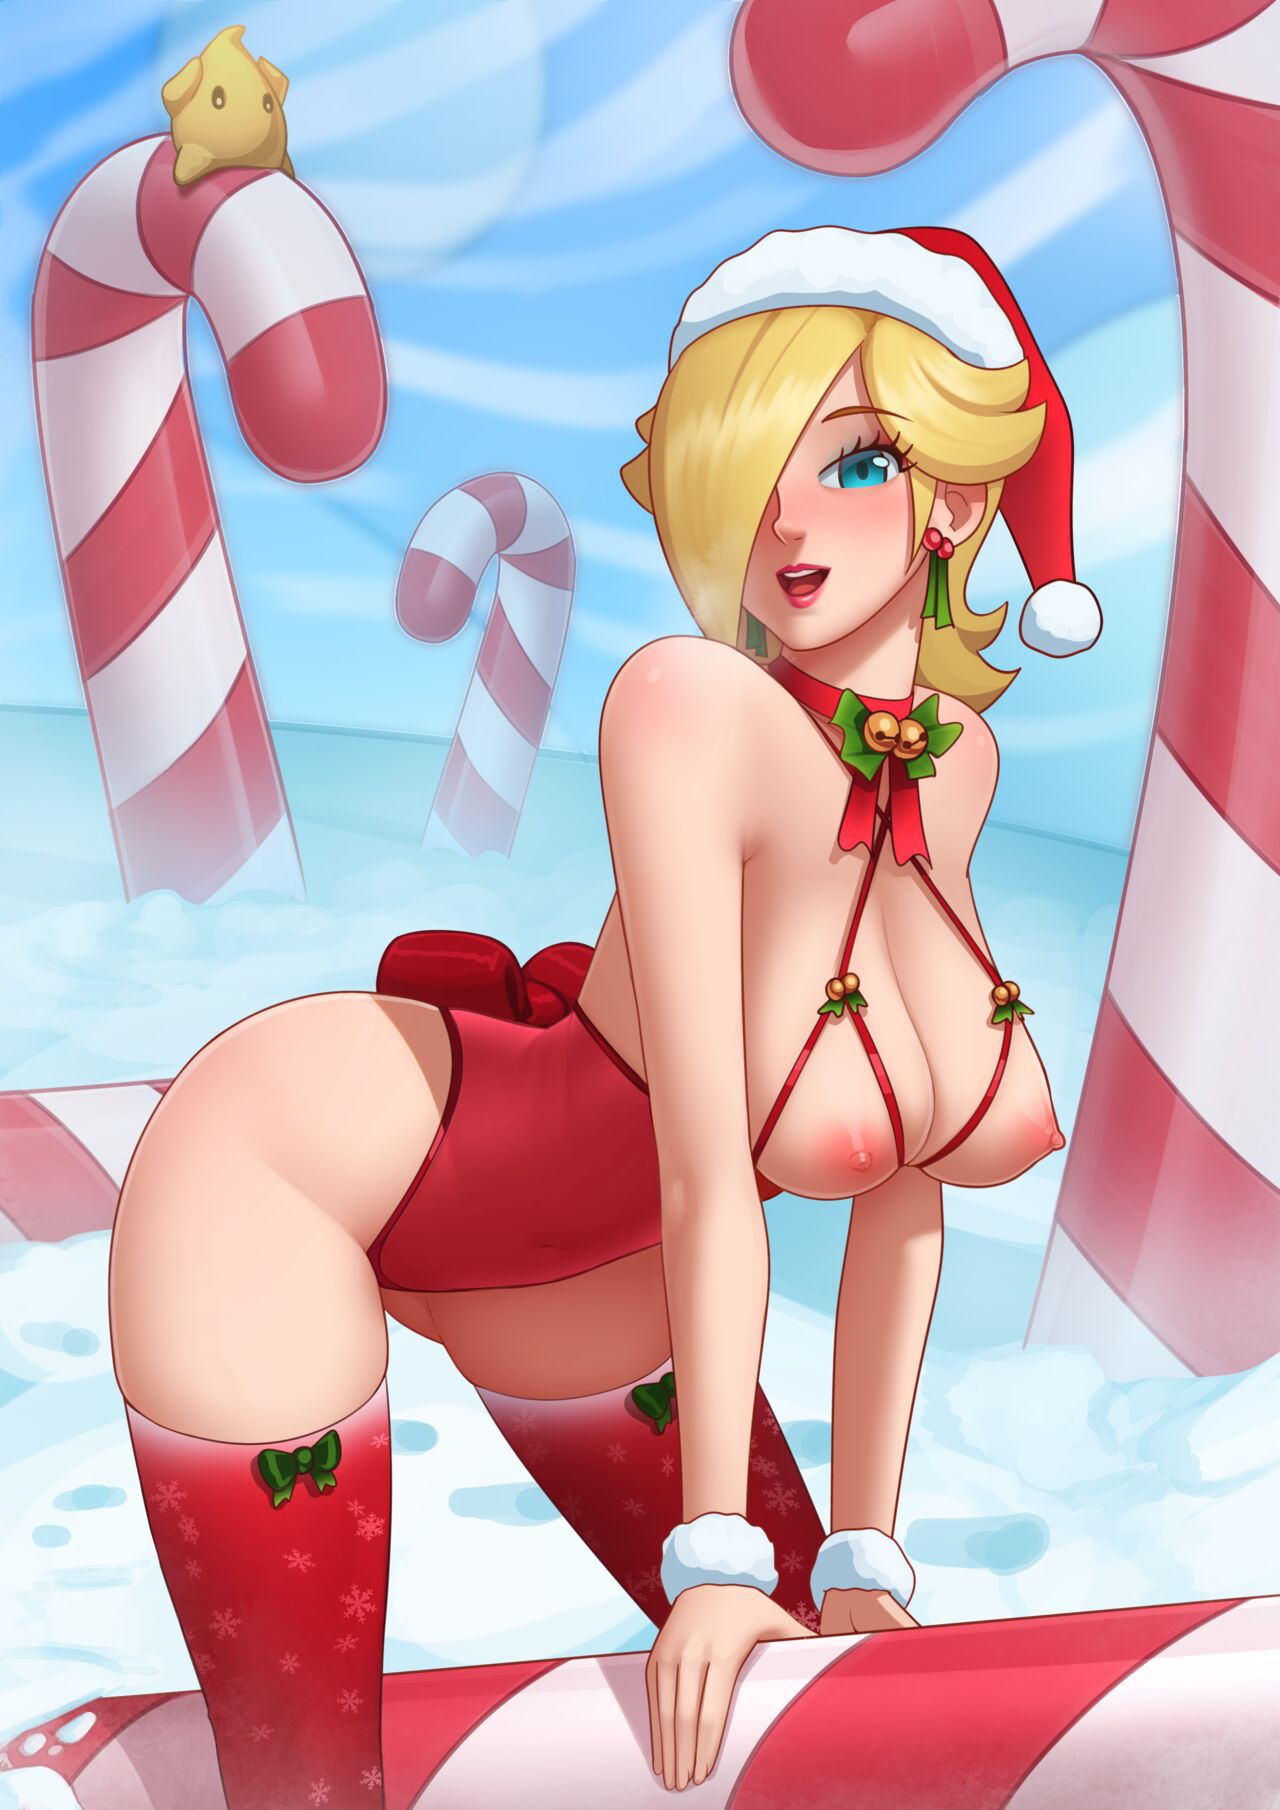 [Deilan12] Candy Canes Appeared 15